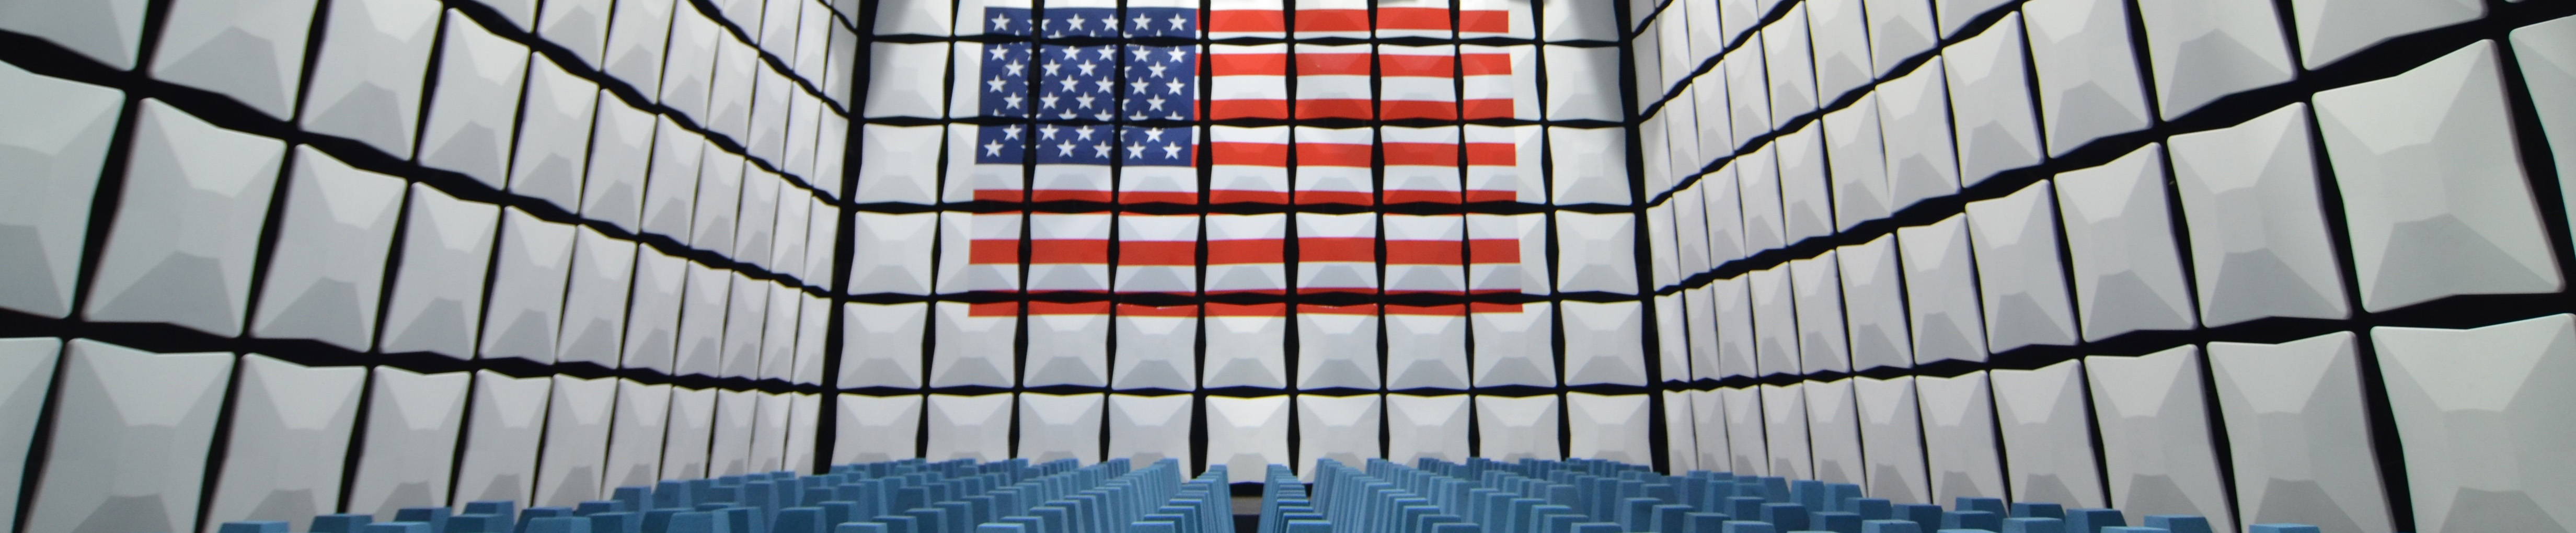 room with square boxes on wall. most boxes are white. some form a pattern of US flag